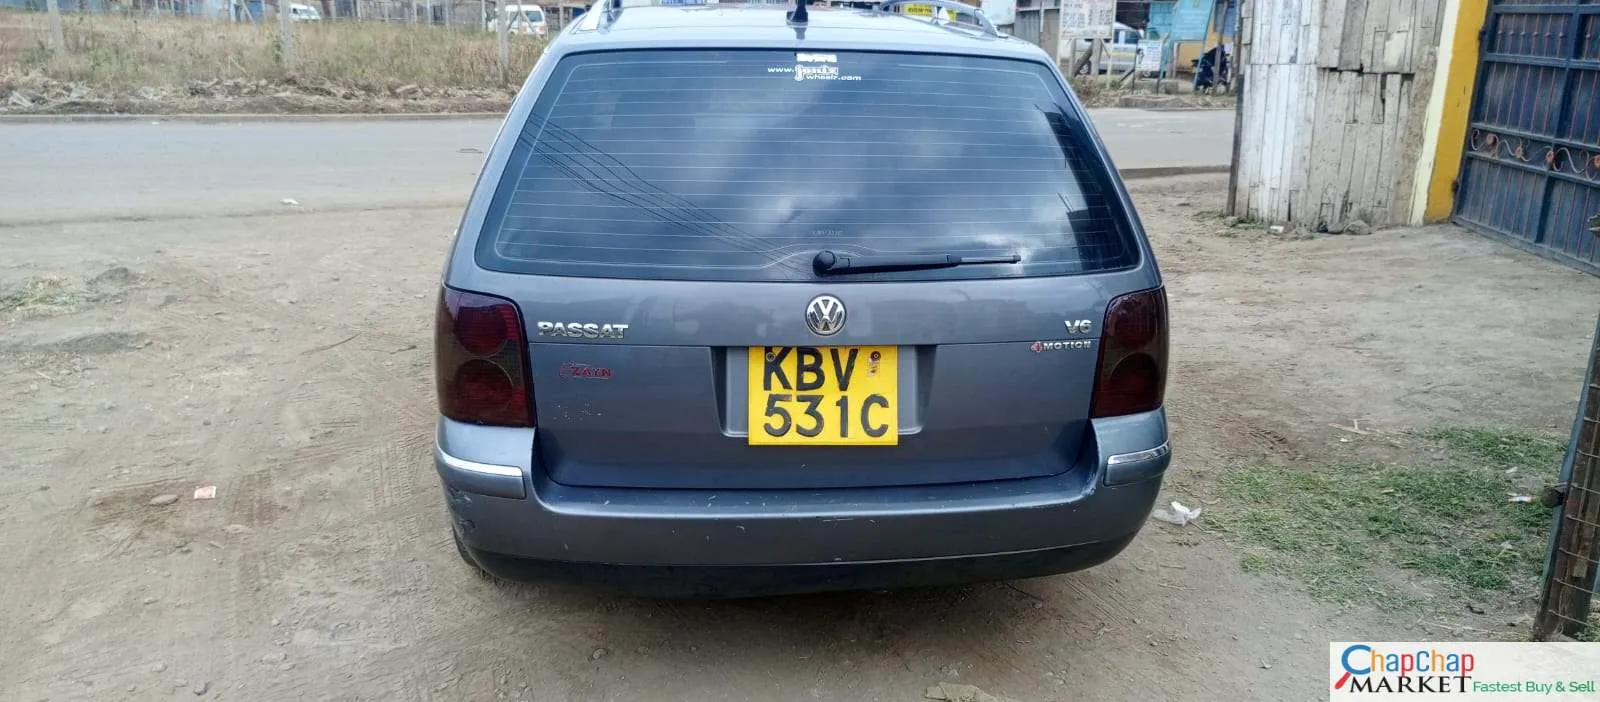 Volkswagen Passat for sale in Kenya QUICK SALE 🔥 You Pay 30% Deposit Trade in Ok EXCLUSIVE hire purchase installments bank finance